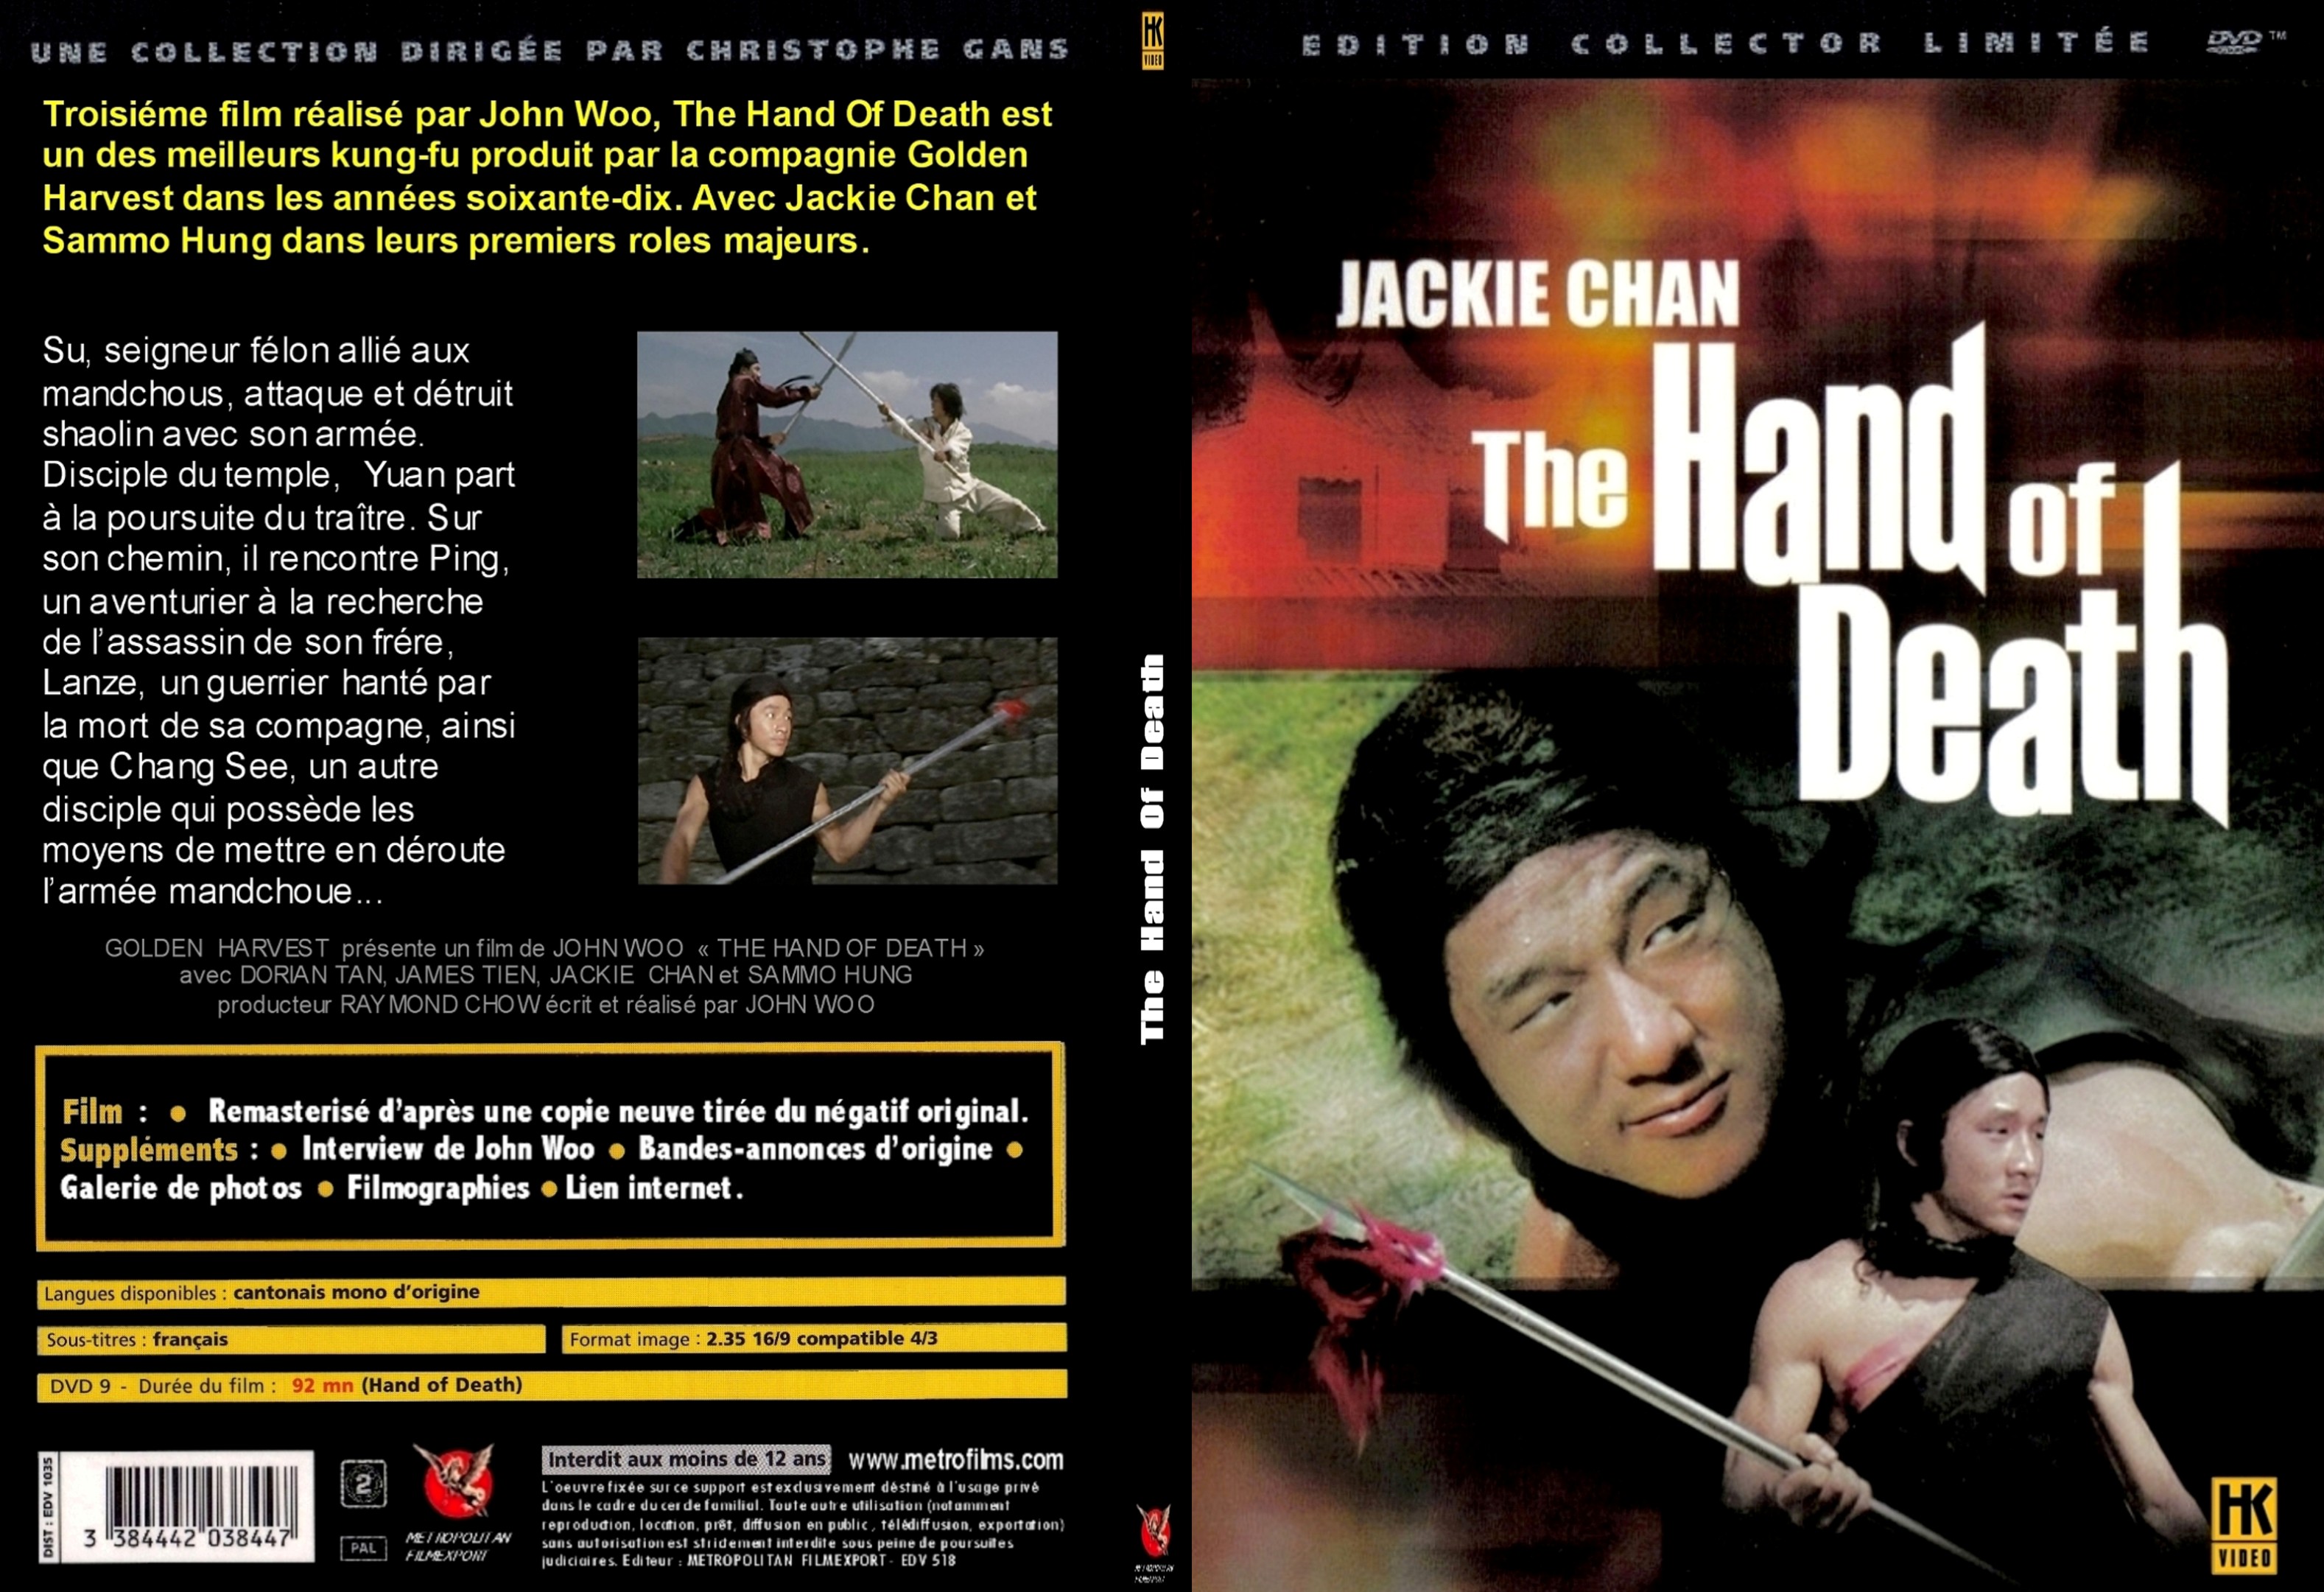 Jaquette DVD The hand of death custom - SLIM